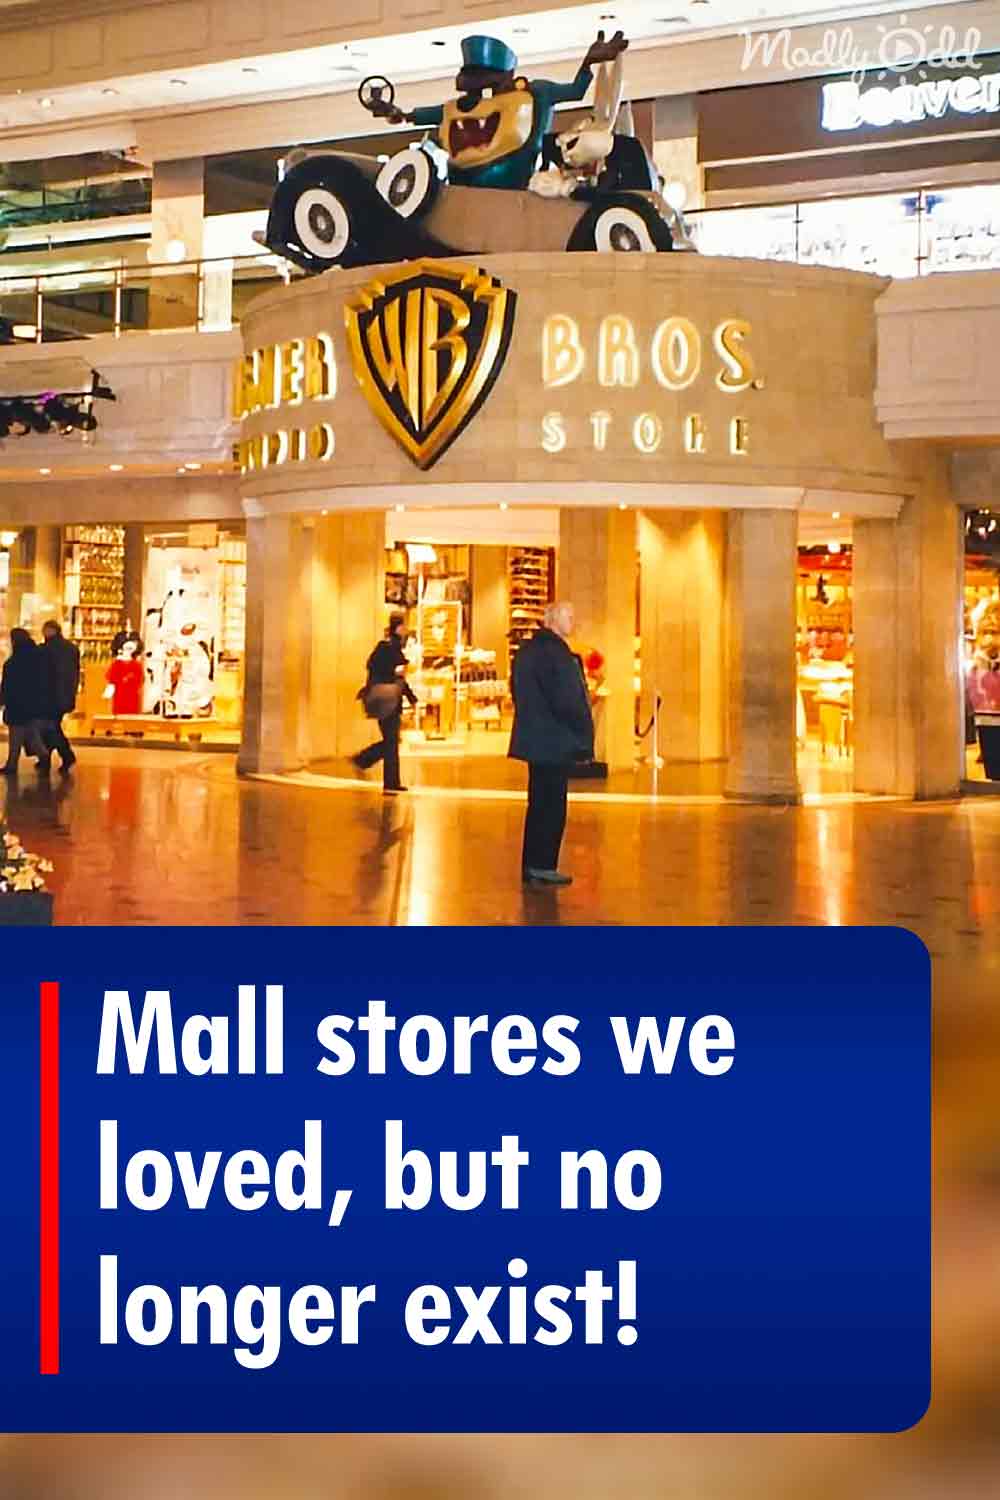 Mall stores we loved, but no longer exist!